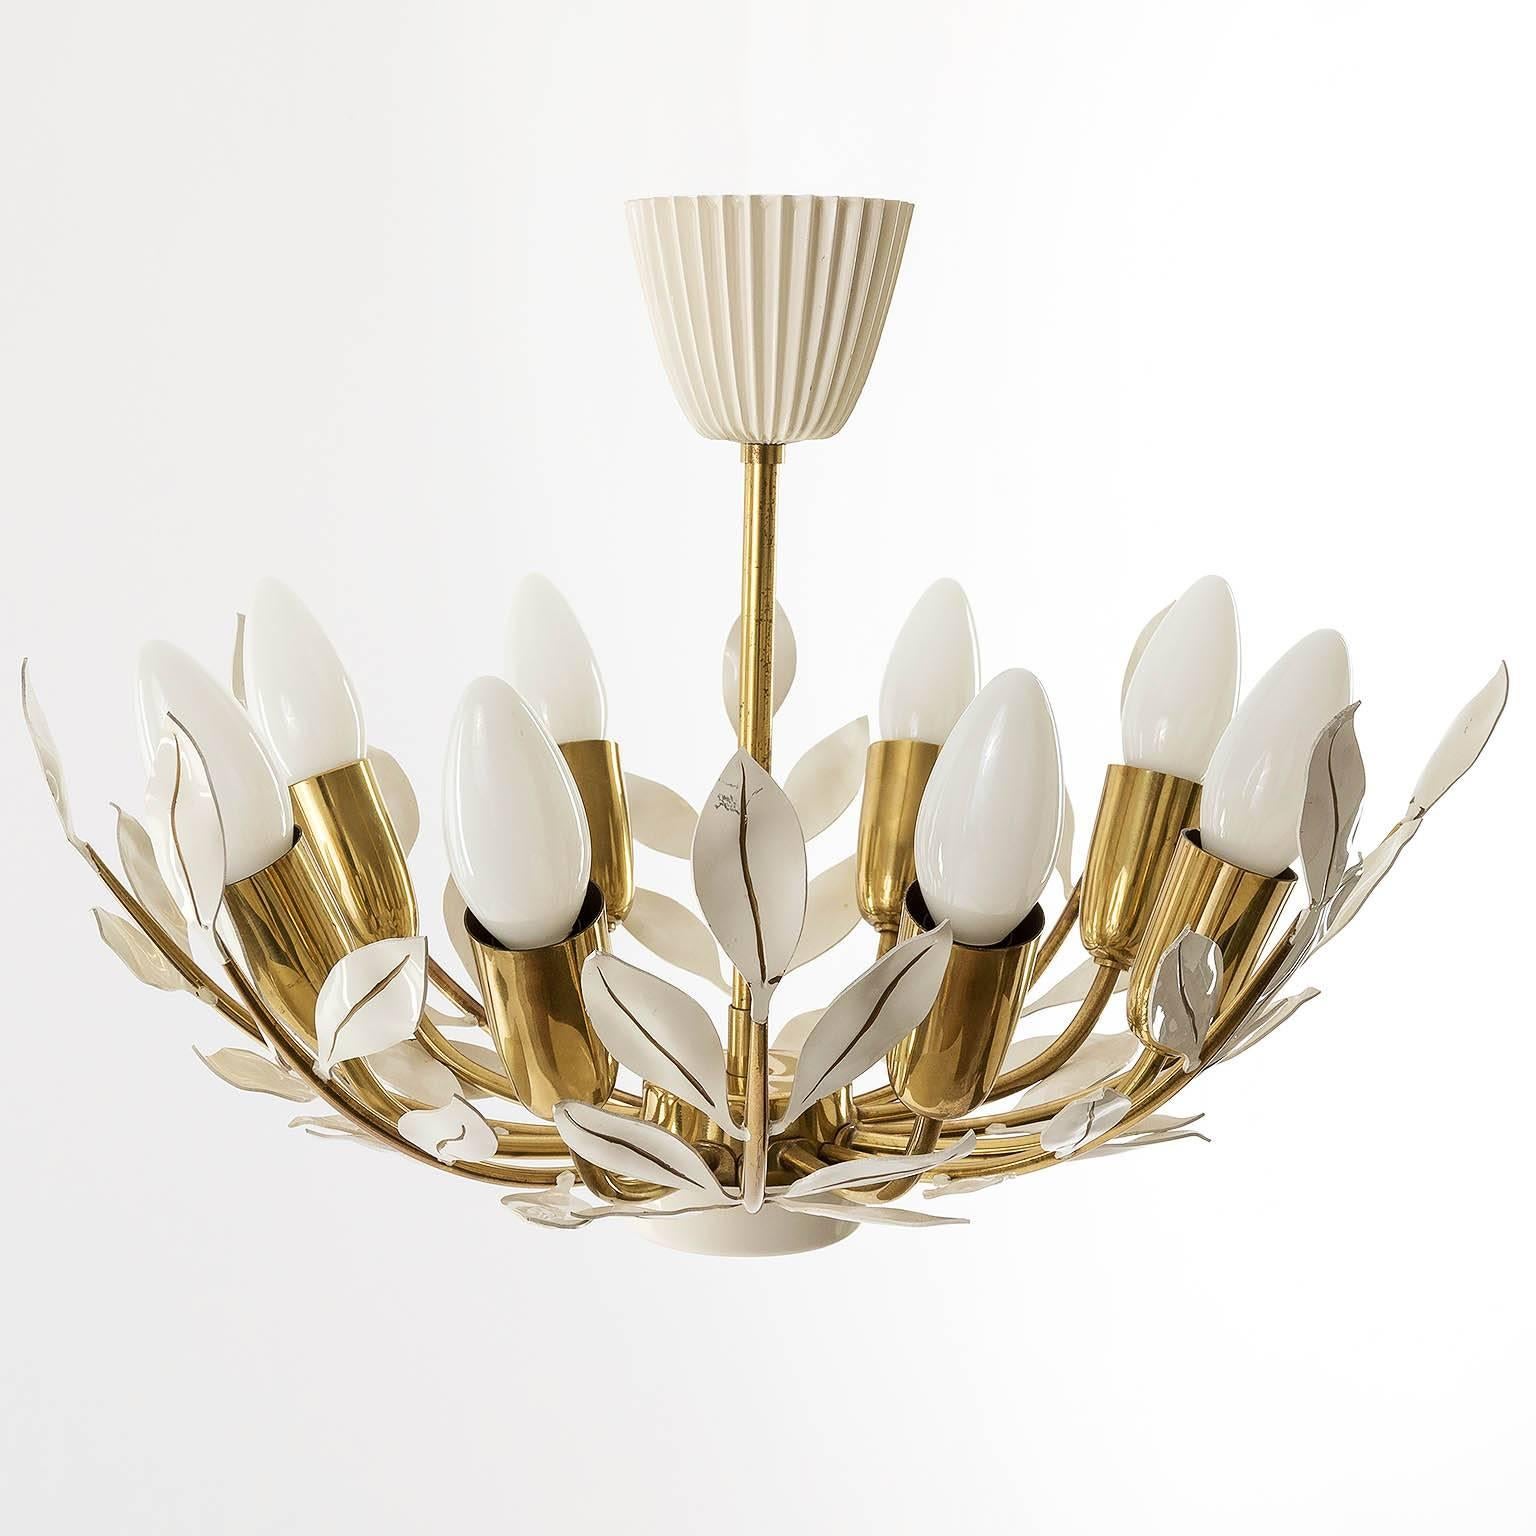 Beautiful floral chandelier or flush mount light fixture by Kalmar, Austria, 1950s. White enameled leaves on brass frame. Eight small base bulbs. Very good condition with minor loss of color on the leaves.